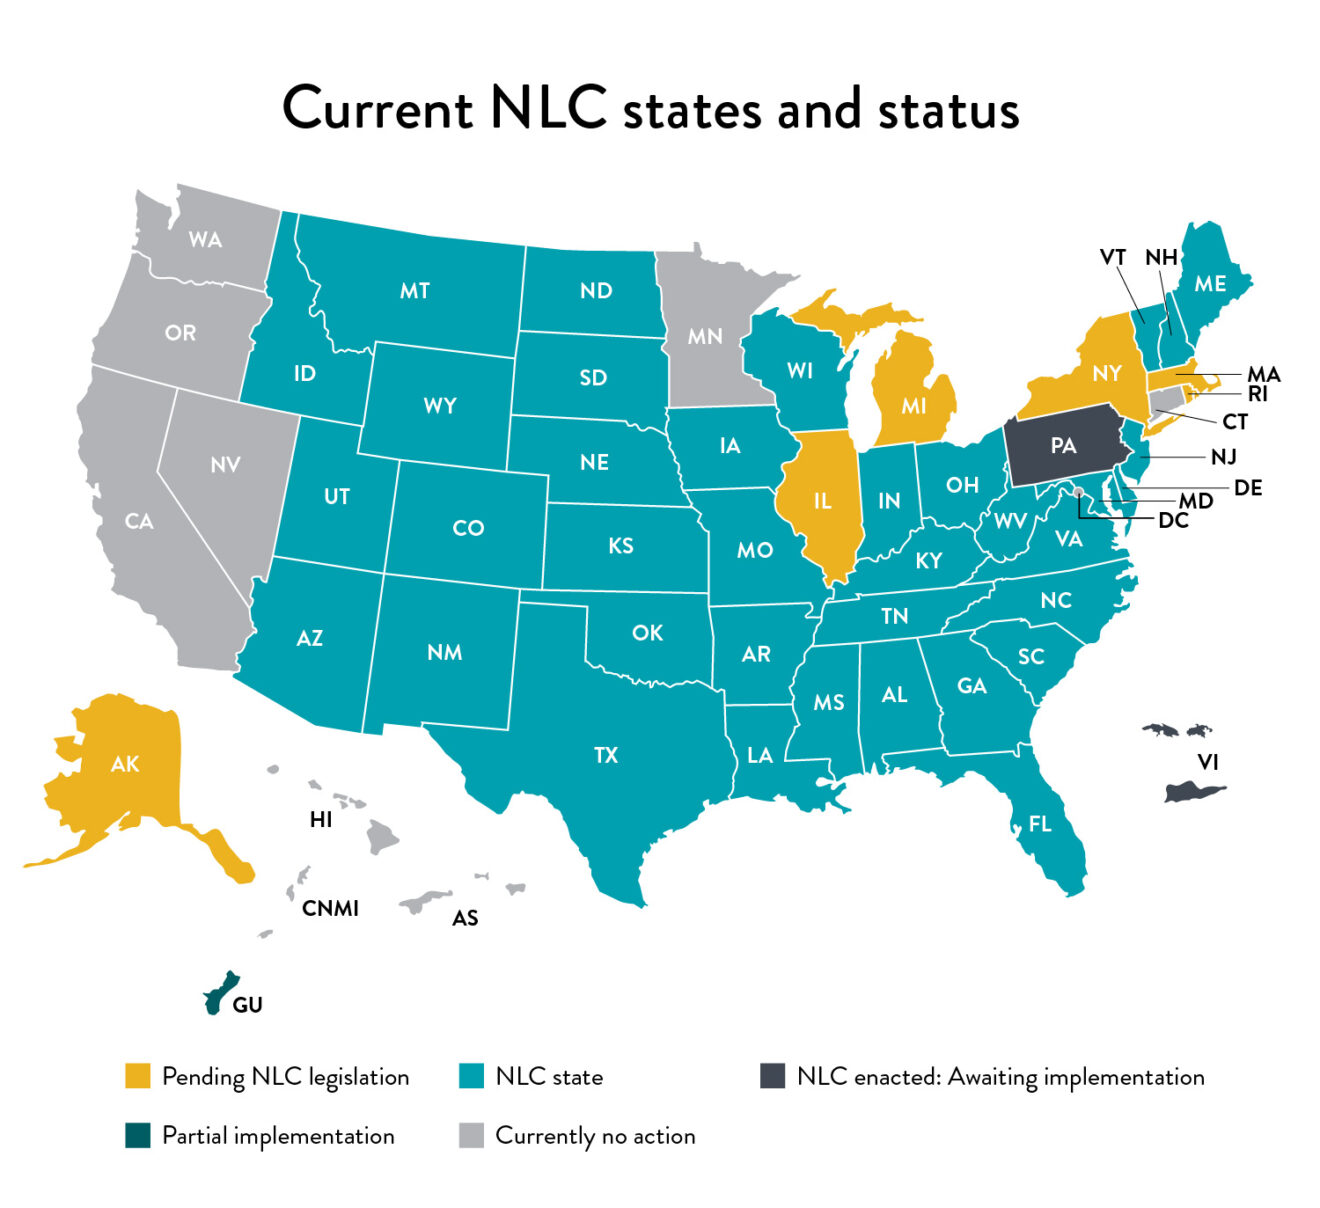 Current NLC states and status 
WA 
OR 
NV 
MT 
WY 
co 
NM 
ND 
SD 
NE 
KS 
OK 
N LC state 
MN 
WI 
IA 
MO 
AR 
VT NH 
NY 
PA 
ME 
MA 
RI 
NJ 
DE 
OH 
KY 
TN 
MD 
DC 
NC 
AK 
HI 
CNMI 
GU 
Pending NLC legislation 
Partial implementation 
sc 
AL 
FL 
AS 
NCC enacted: Awaiting implementation 
Currently no action 